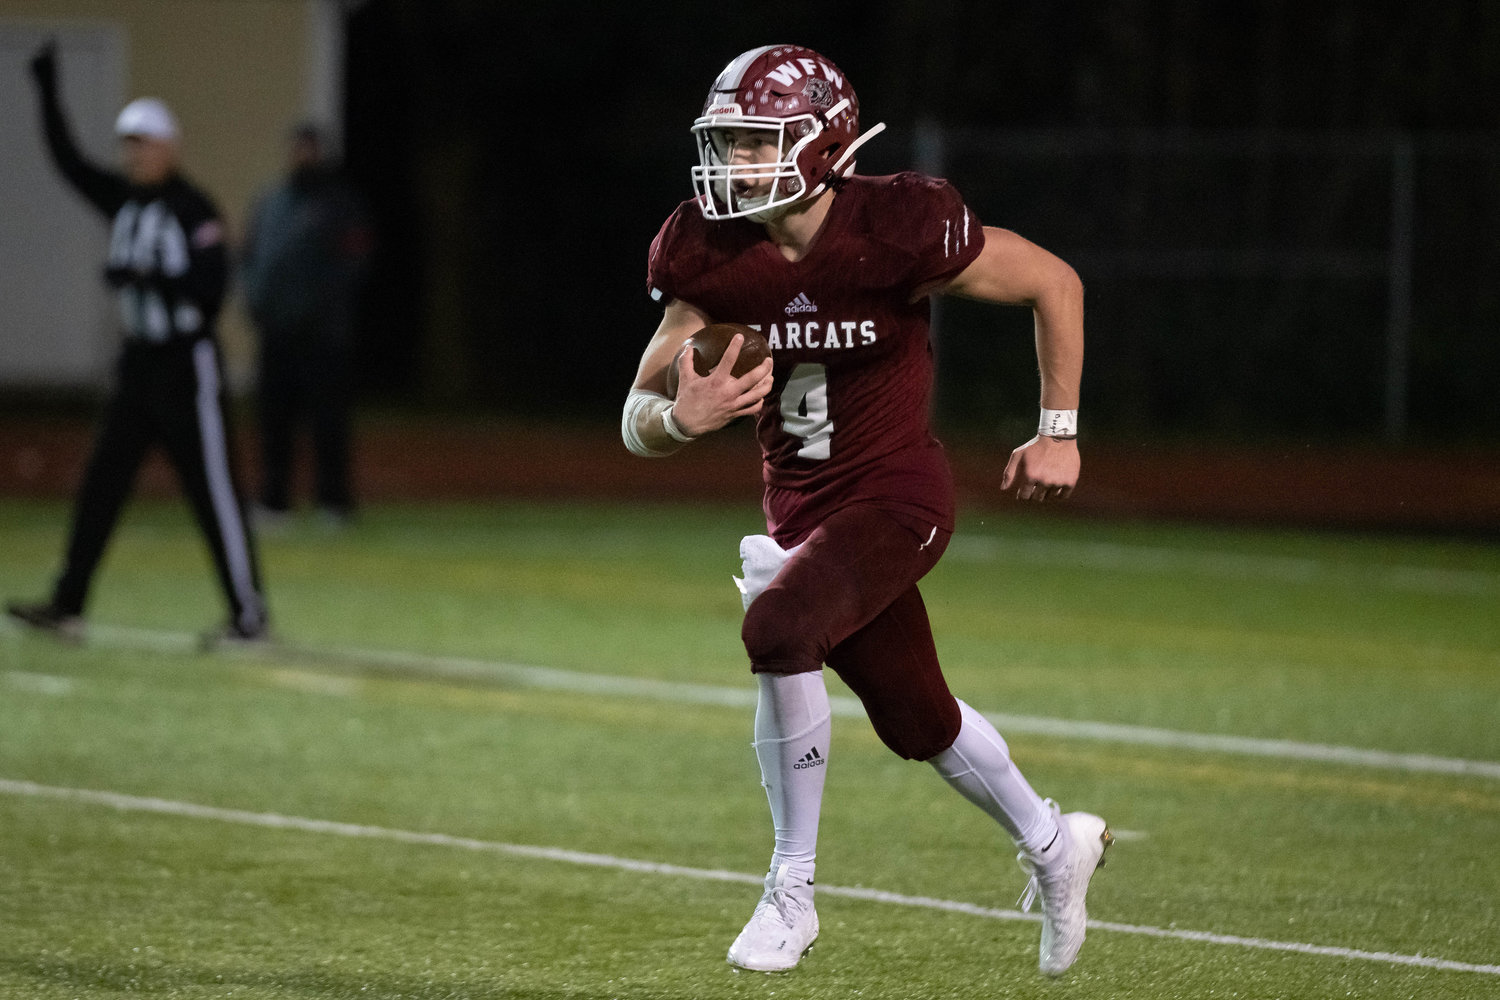 W.F. West receiver Gage Brumfield returns a kickoff against North Kitsap in the 2A state semifinals Nov. 26 at Tumwater District Stadium.